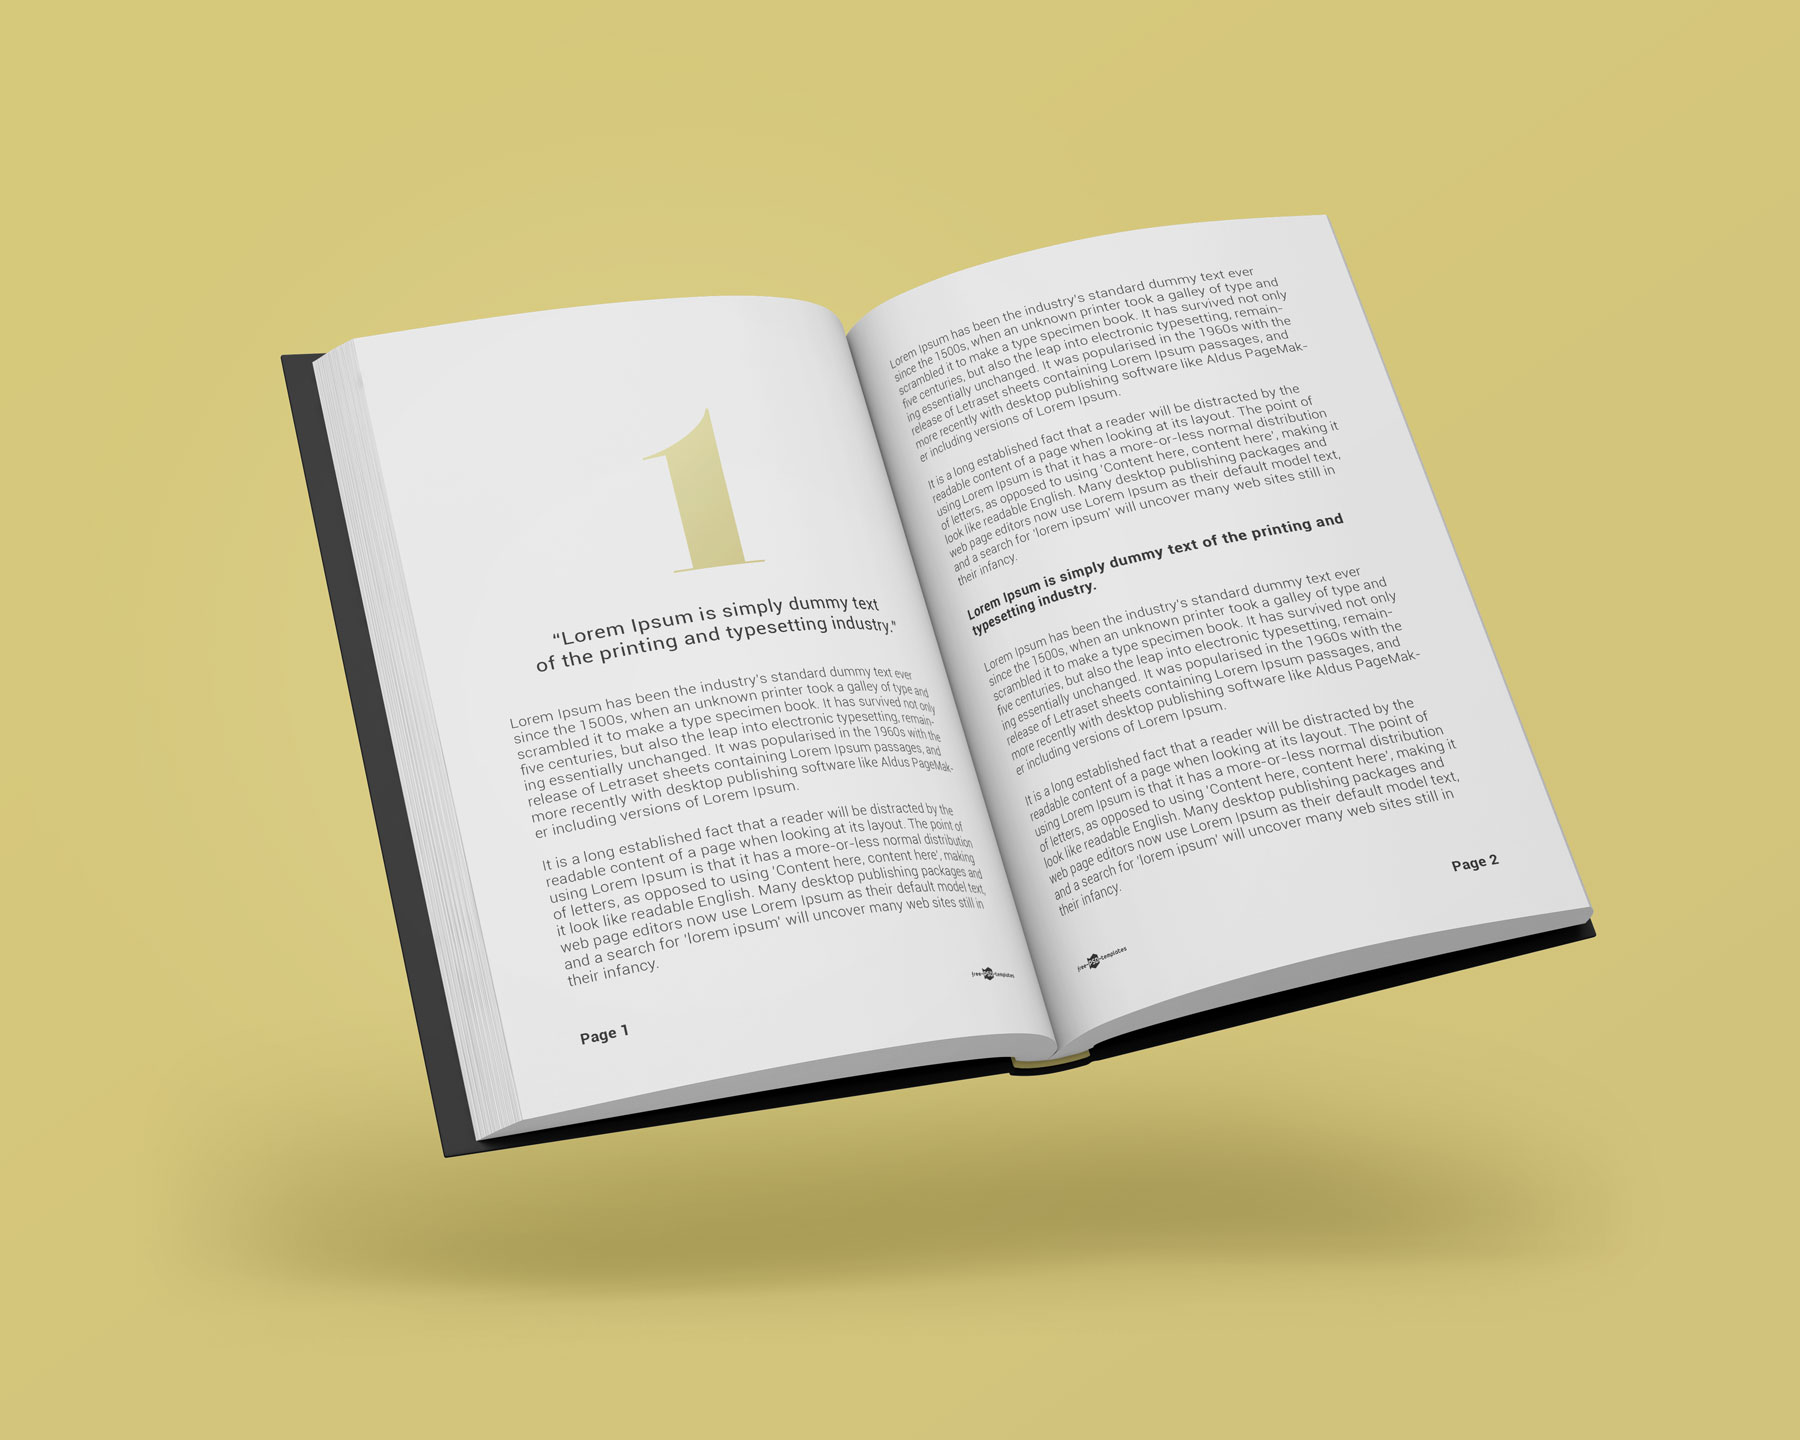 Download 3 Free Hardcover Book Mockup Psd Files Psfiles Free Photoshop Files